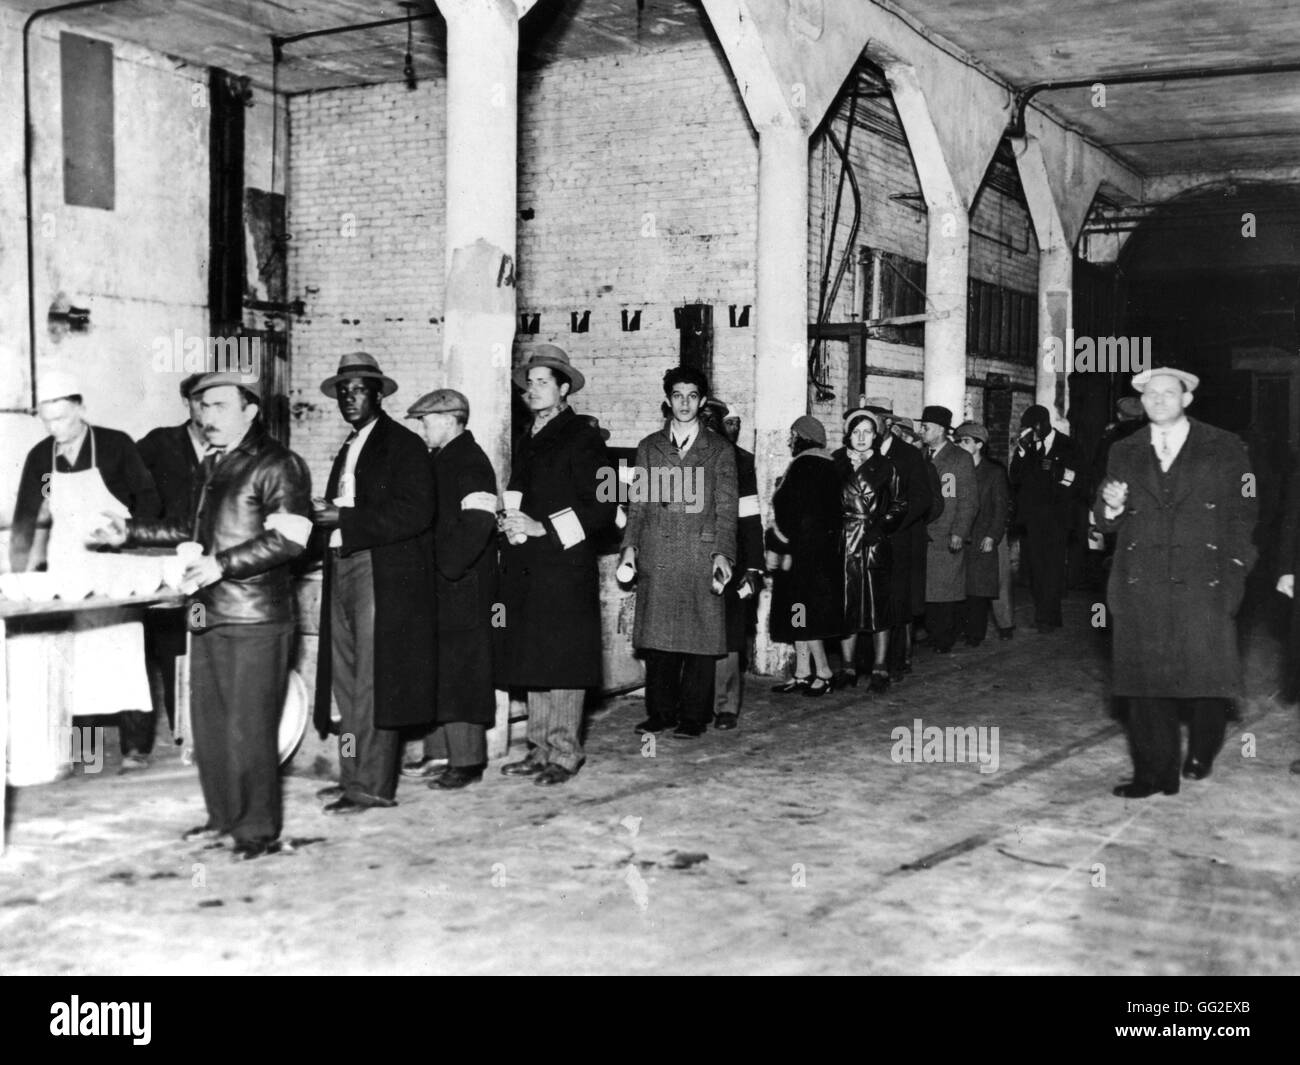 The Salvation Army feeding the jobless during the Great Depression c.1929-1930 United States of America Stock Photo